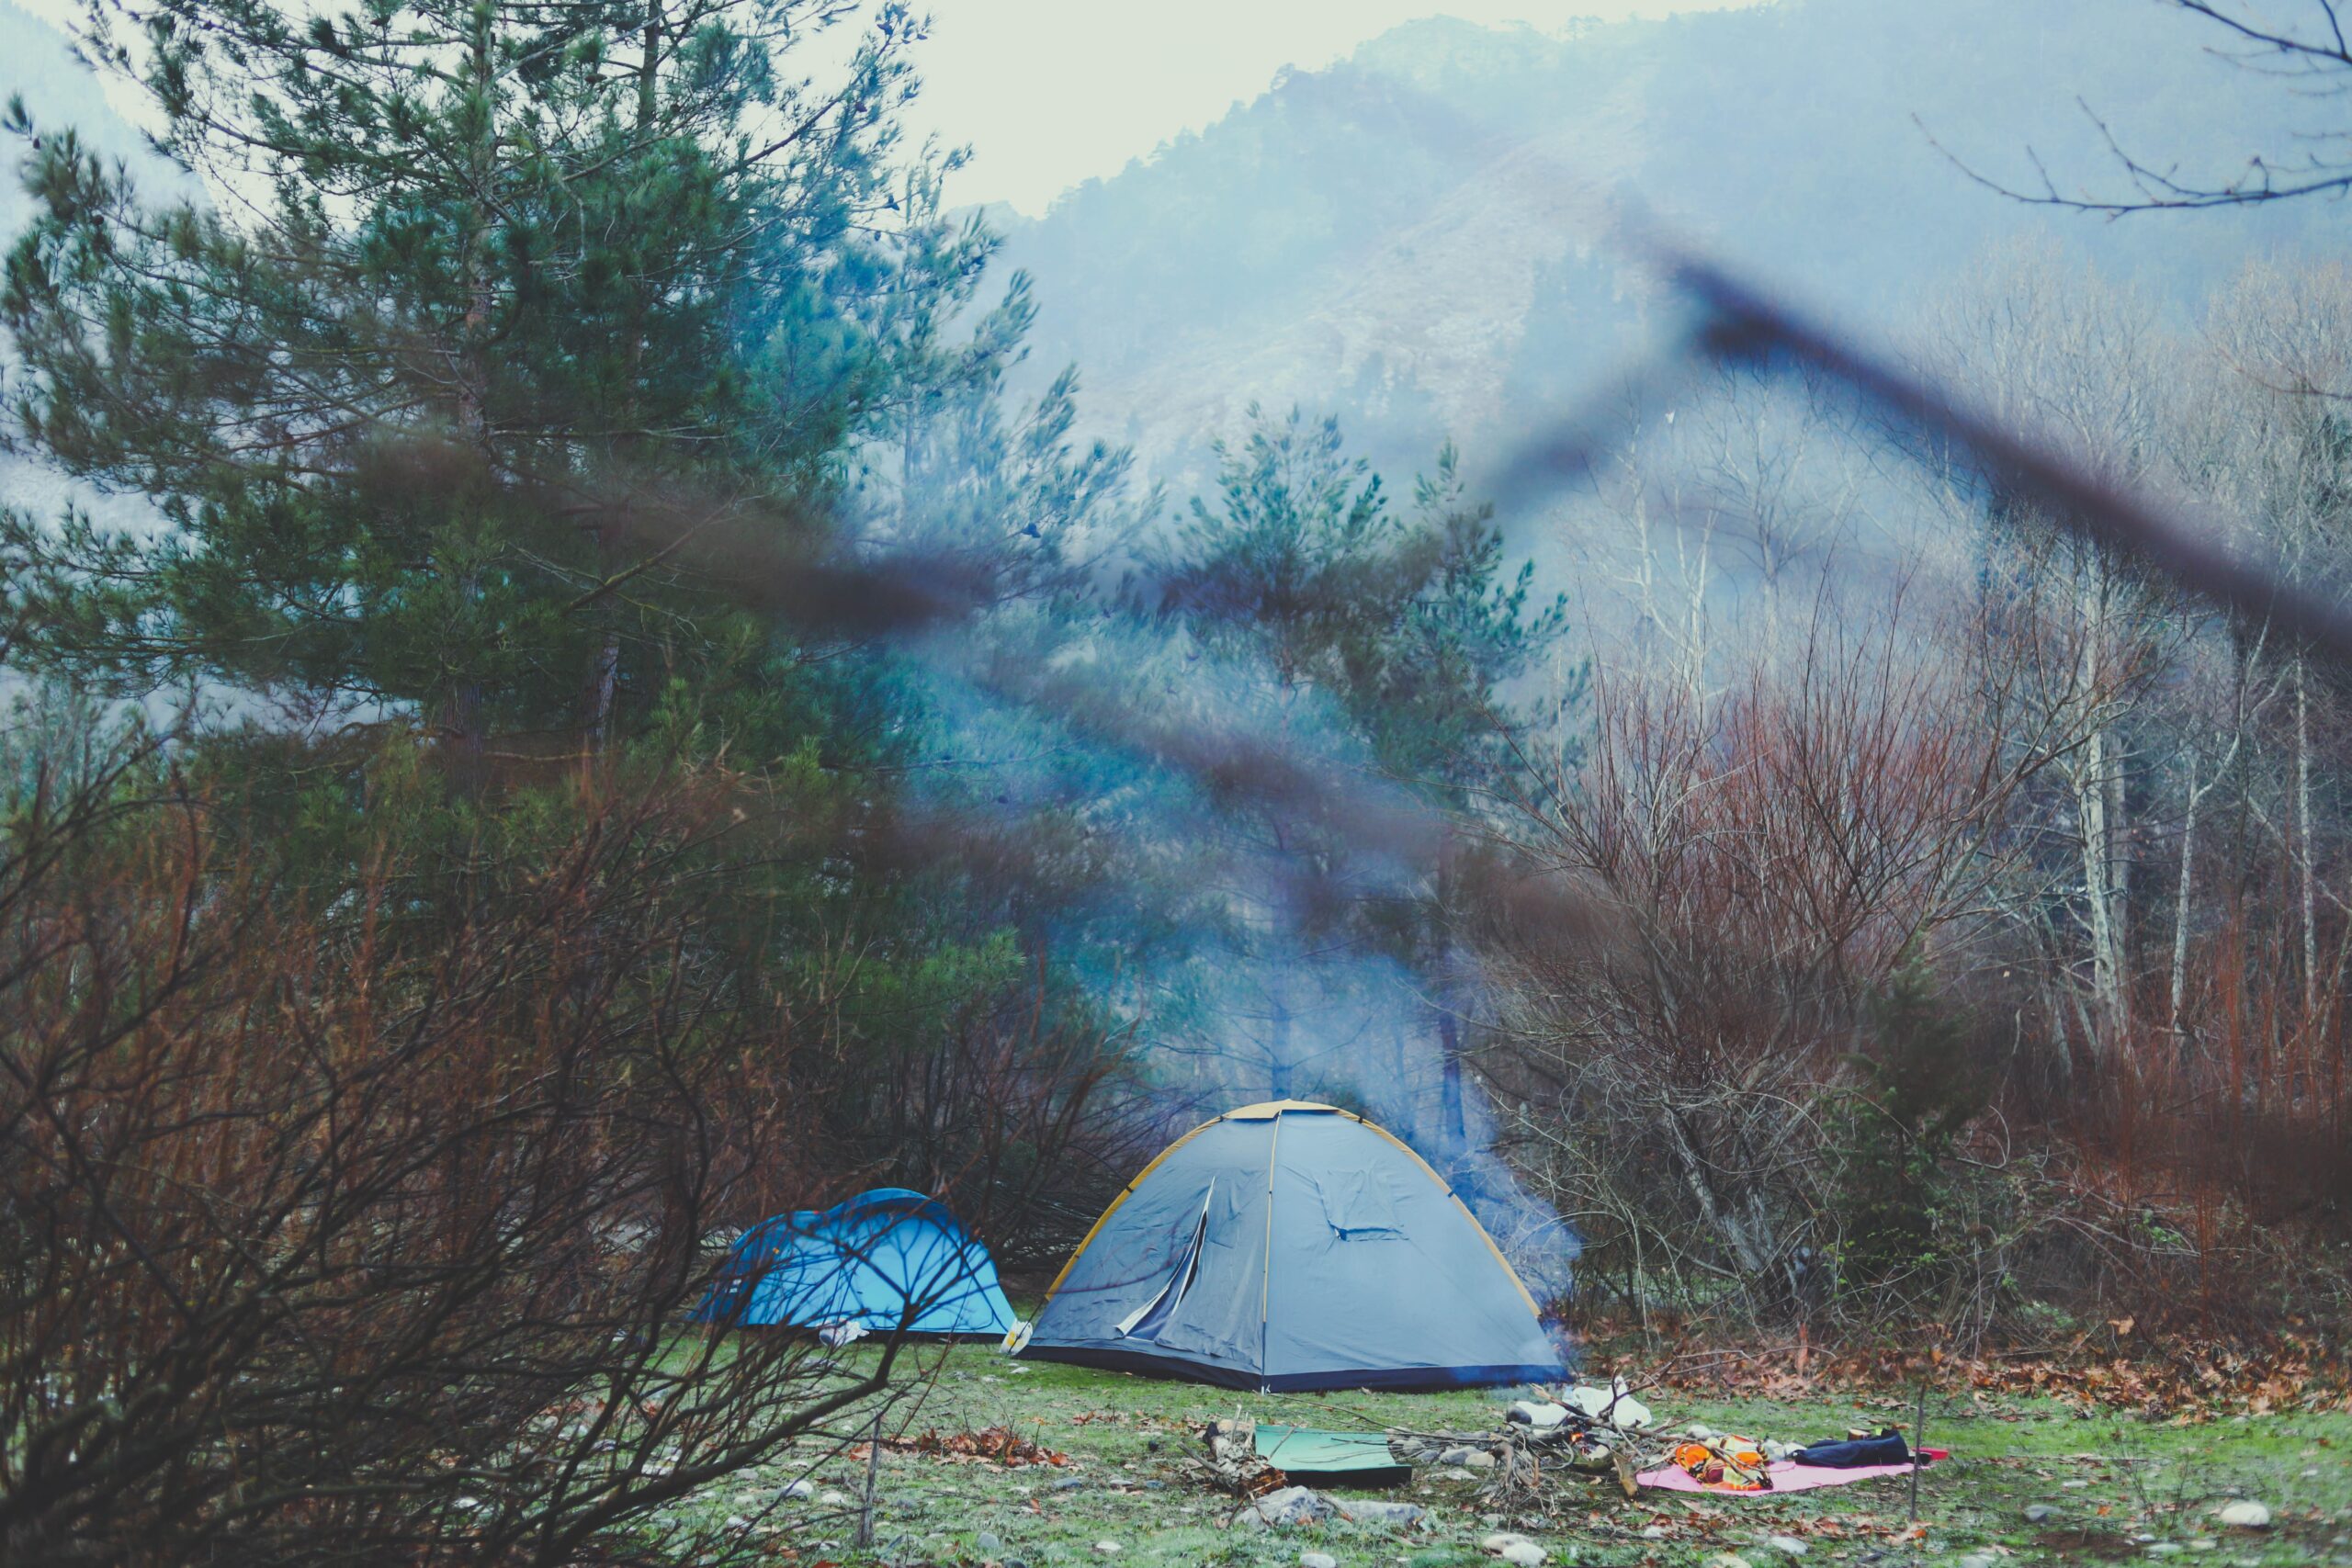 Do Tents Keep You Warm? (What You Need to Stay Toasty!)